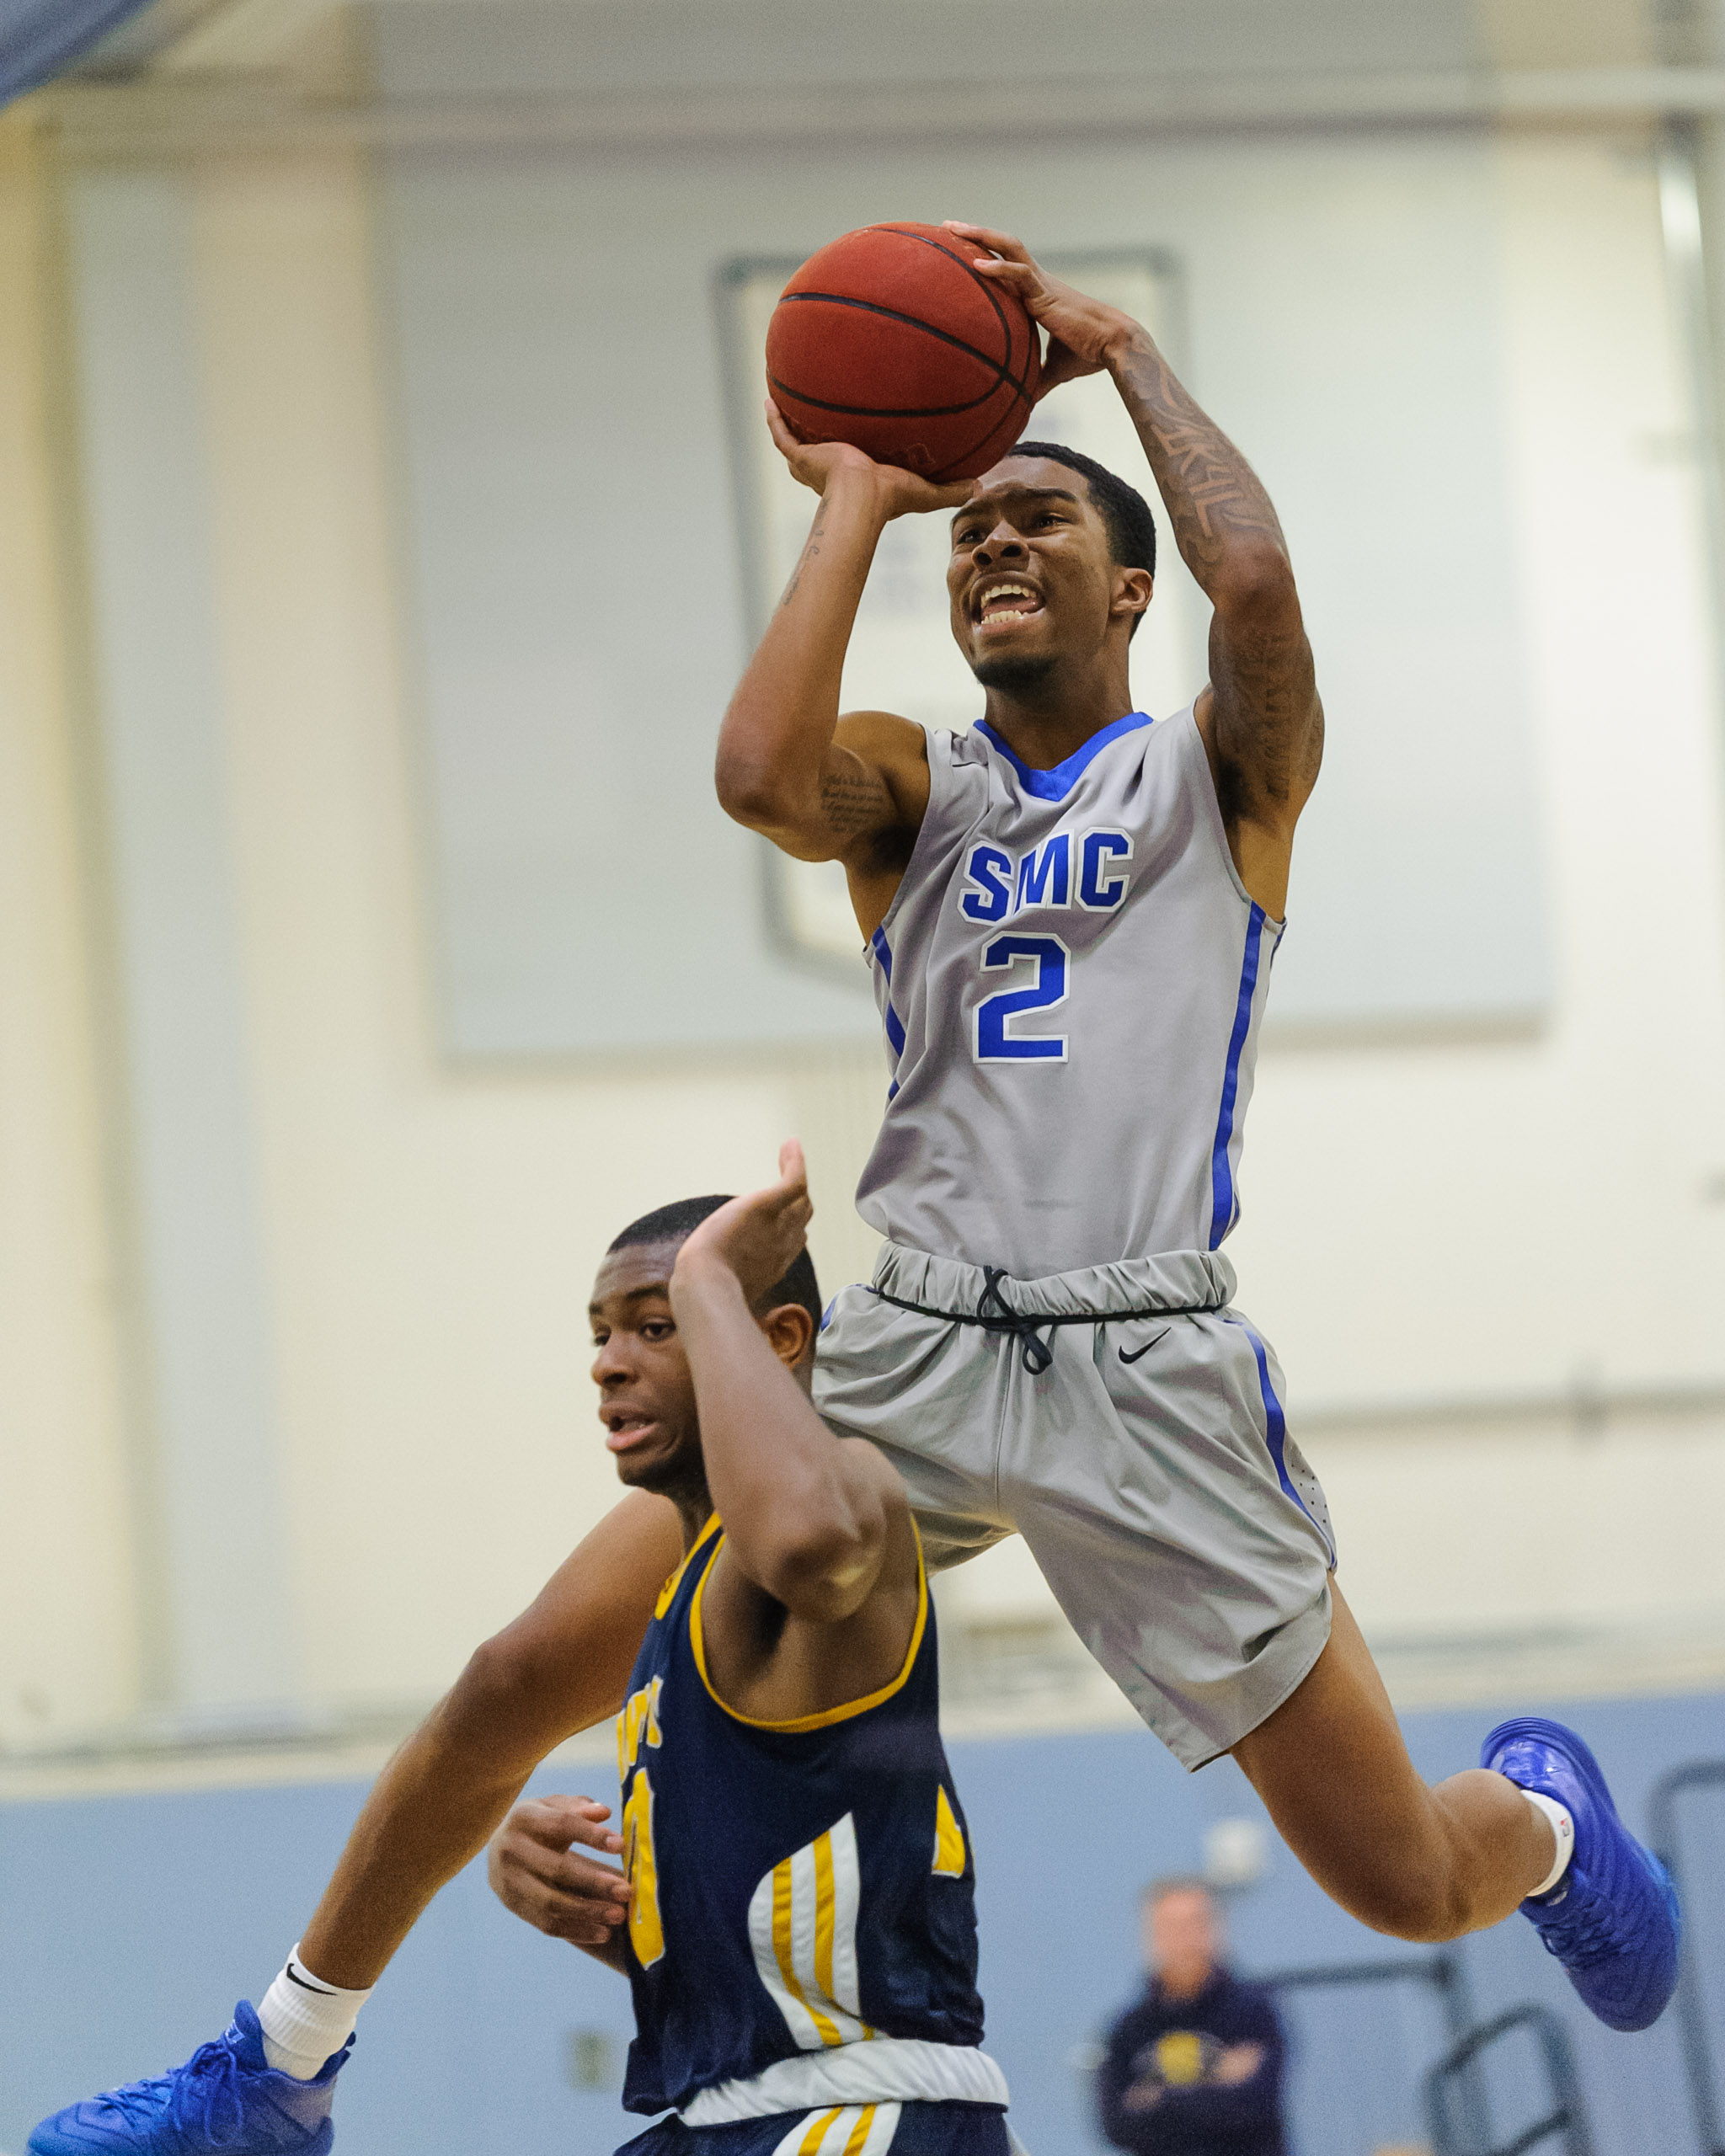  Guard Joe Robinson (2,Right) of Santa Monica College draws a shooting foul on the College of the Canyons defense. The Santa Monica College Corsairs lose the game 74-72 to the College of the Canyons Cougars. The game was held at the SMC Pavilion at t